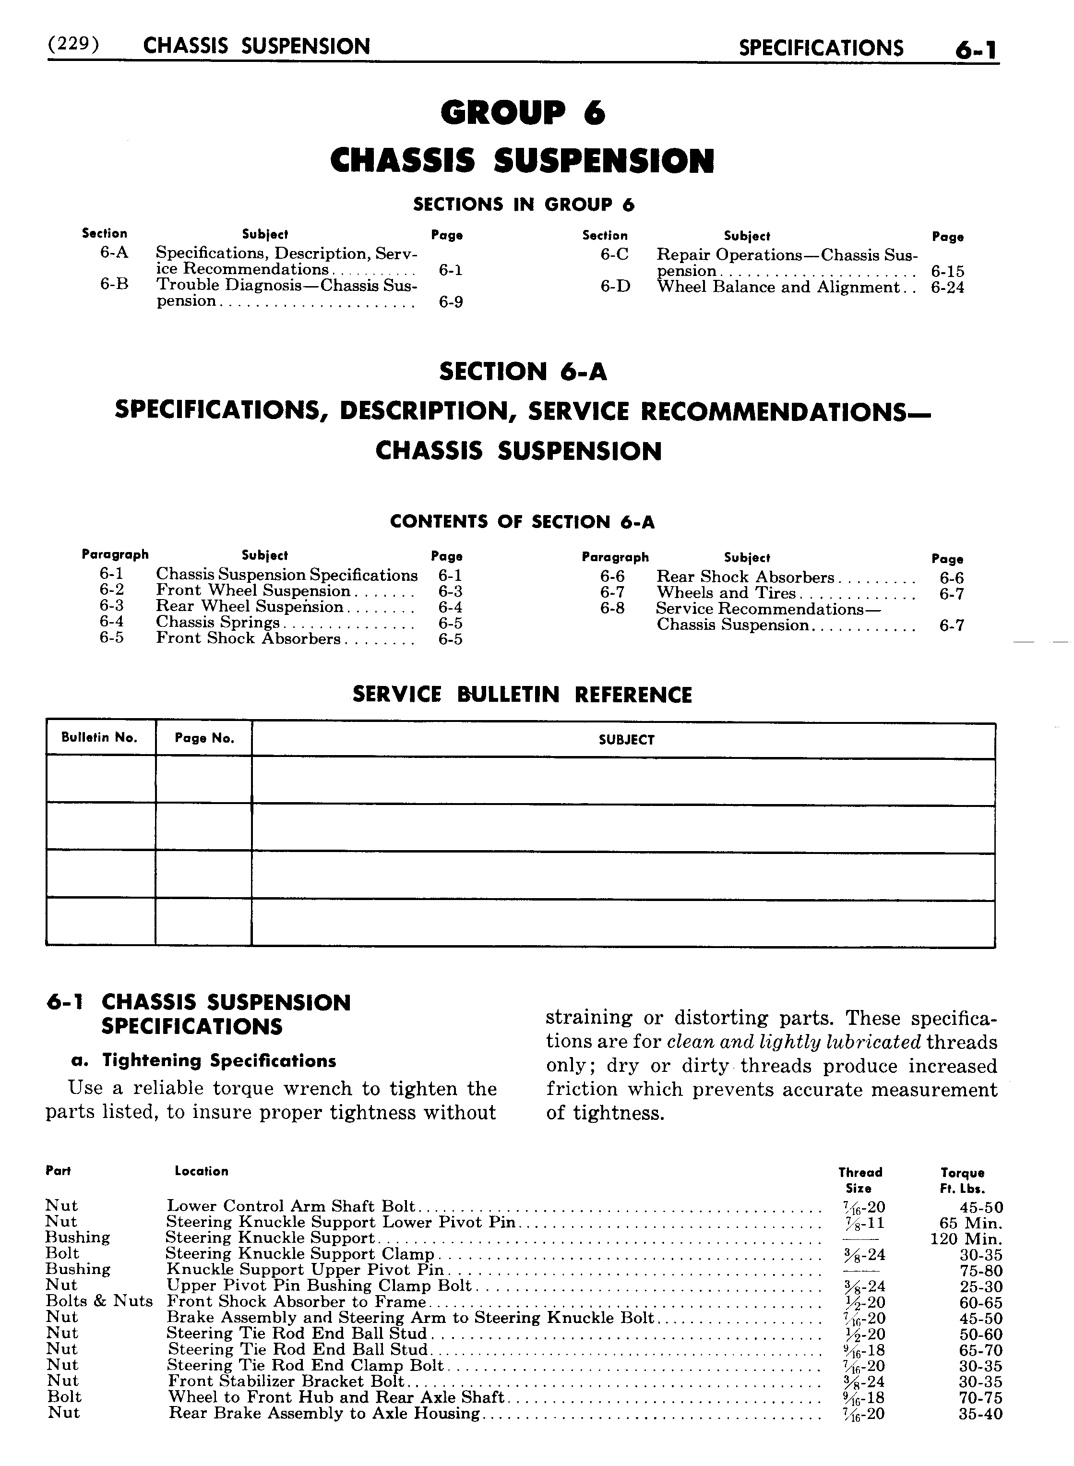 n_07 1951 Buick Shop Manual - Chassis Suspension-001-001.jpg